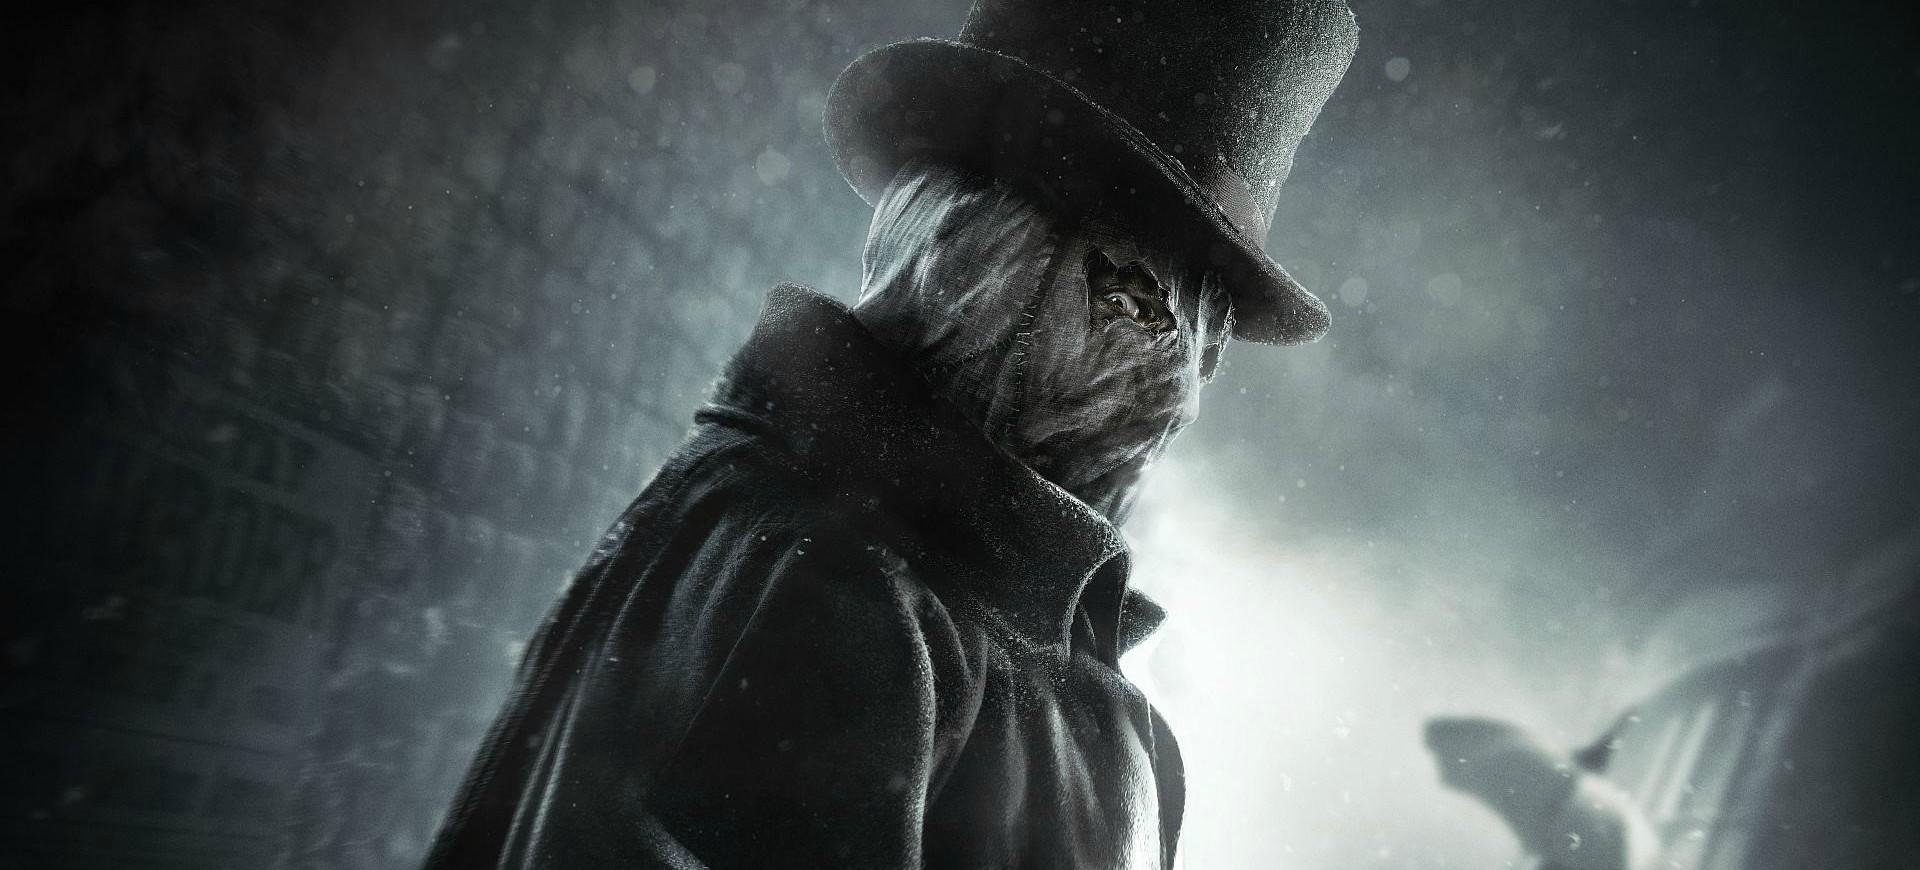 ASSASSIN’S CREED SYNDICATE – JACK THE RIPPER - Đánh Giá Game